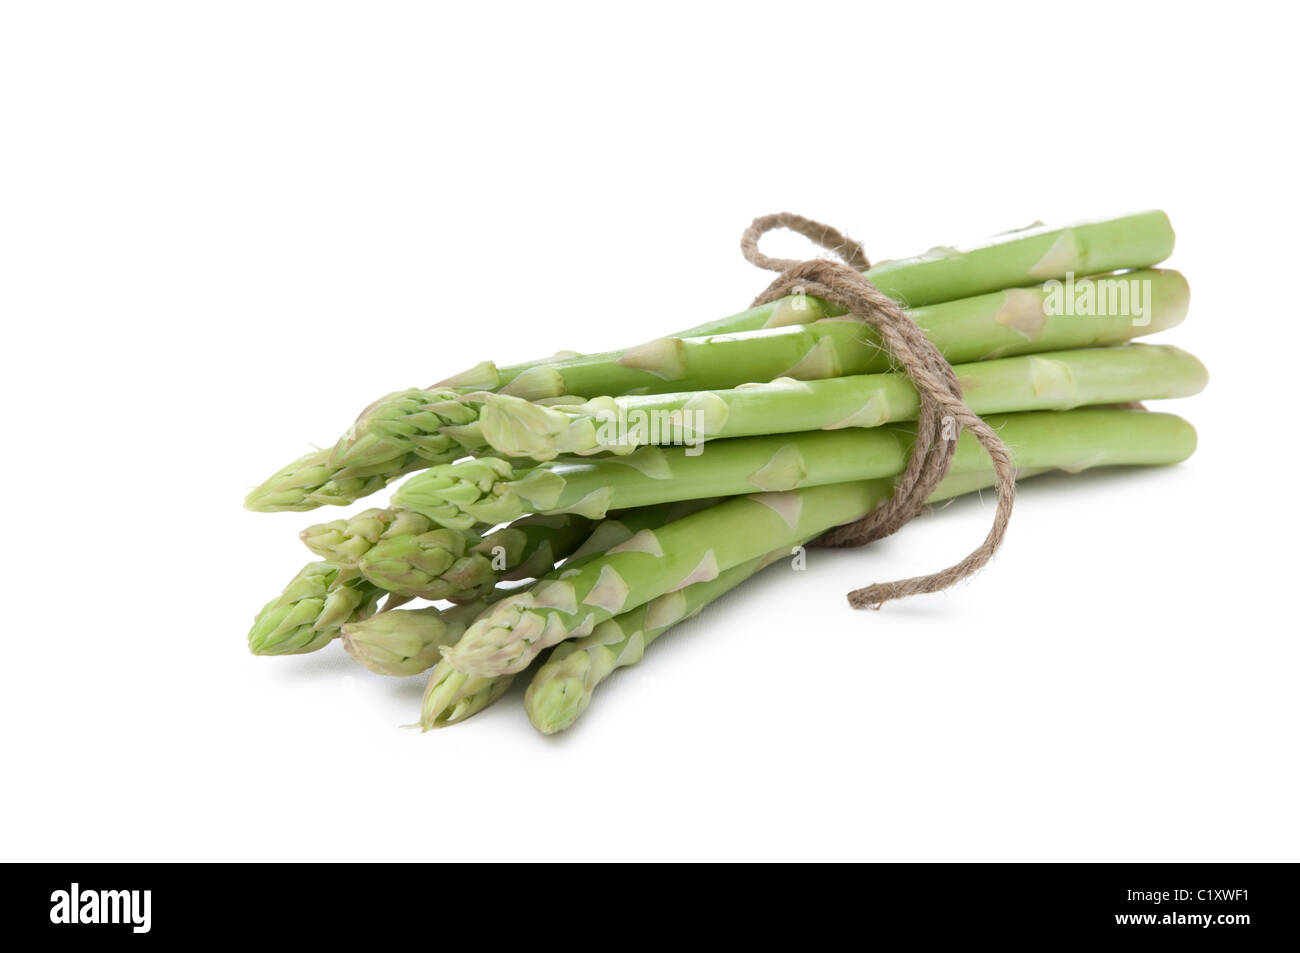 Asparagus spears tied with sting. Stock Photo